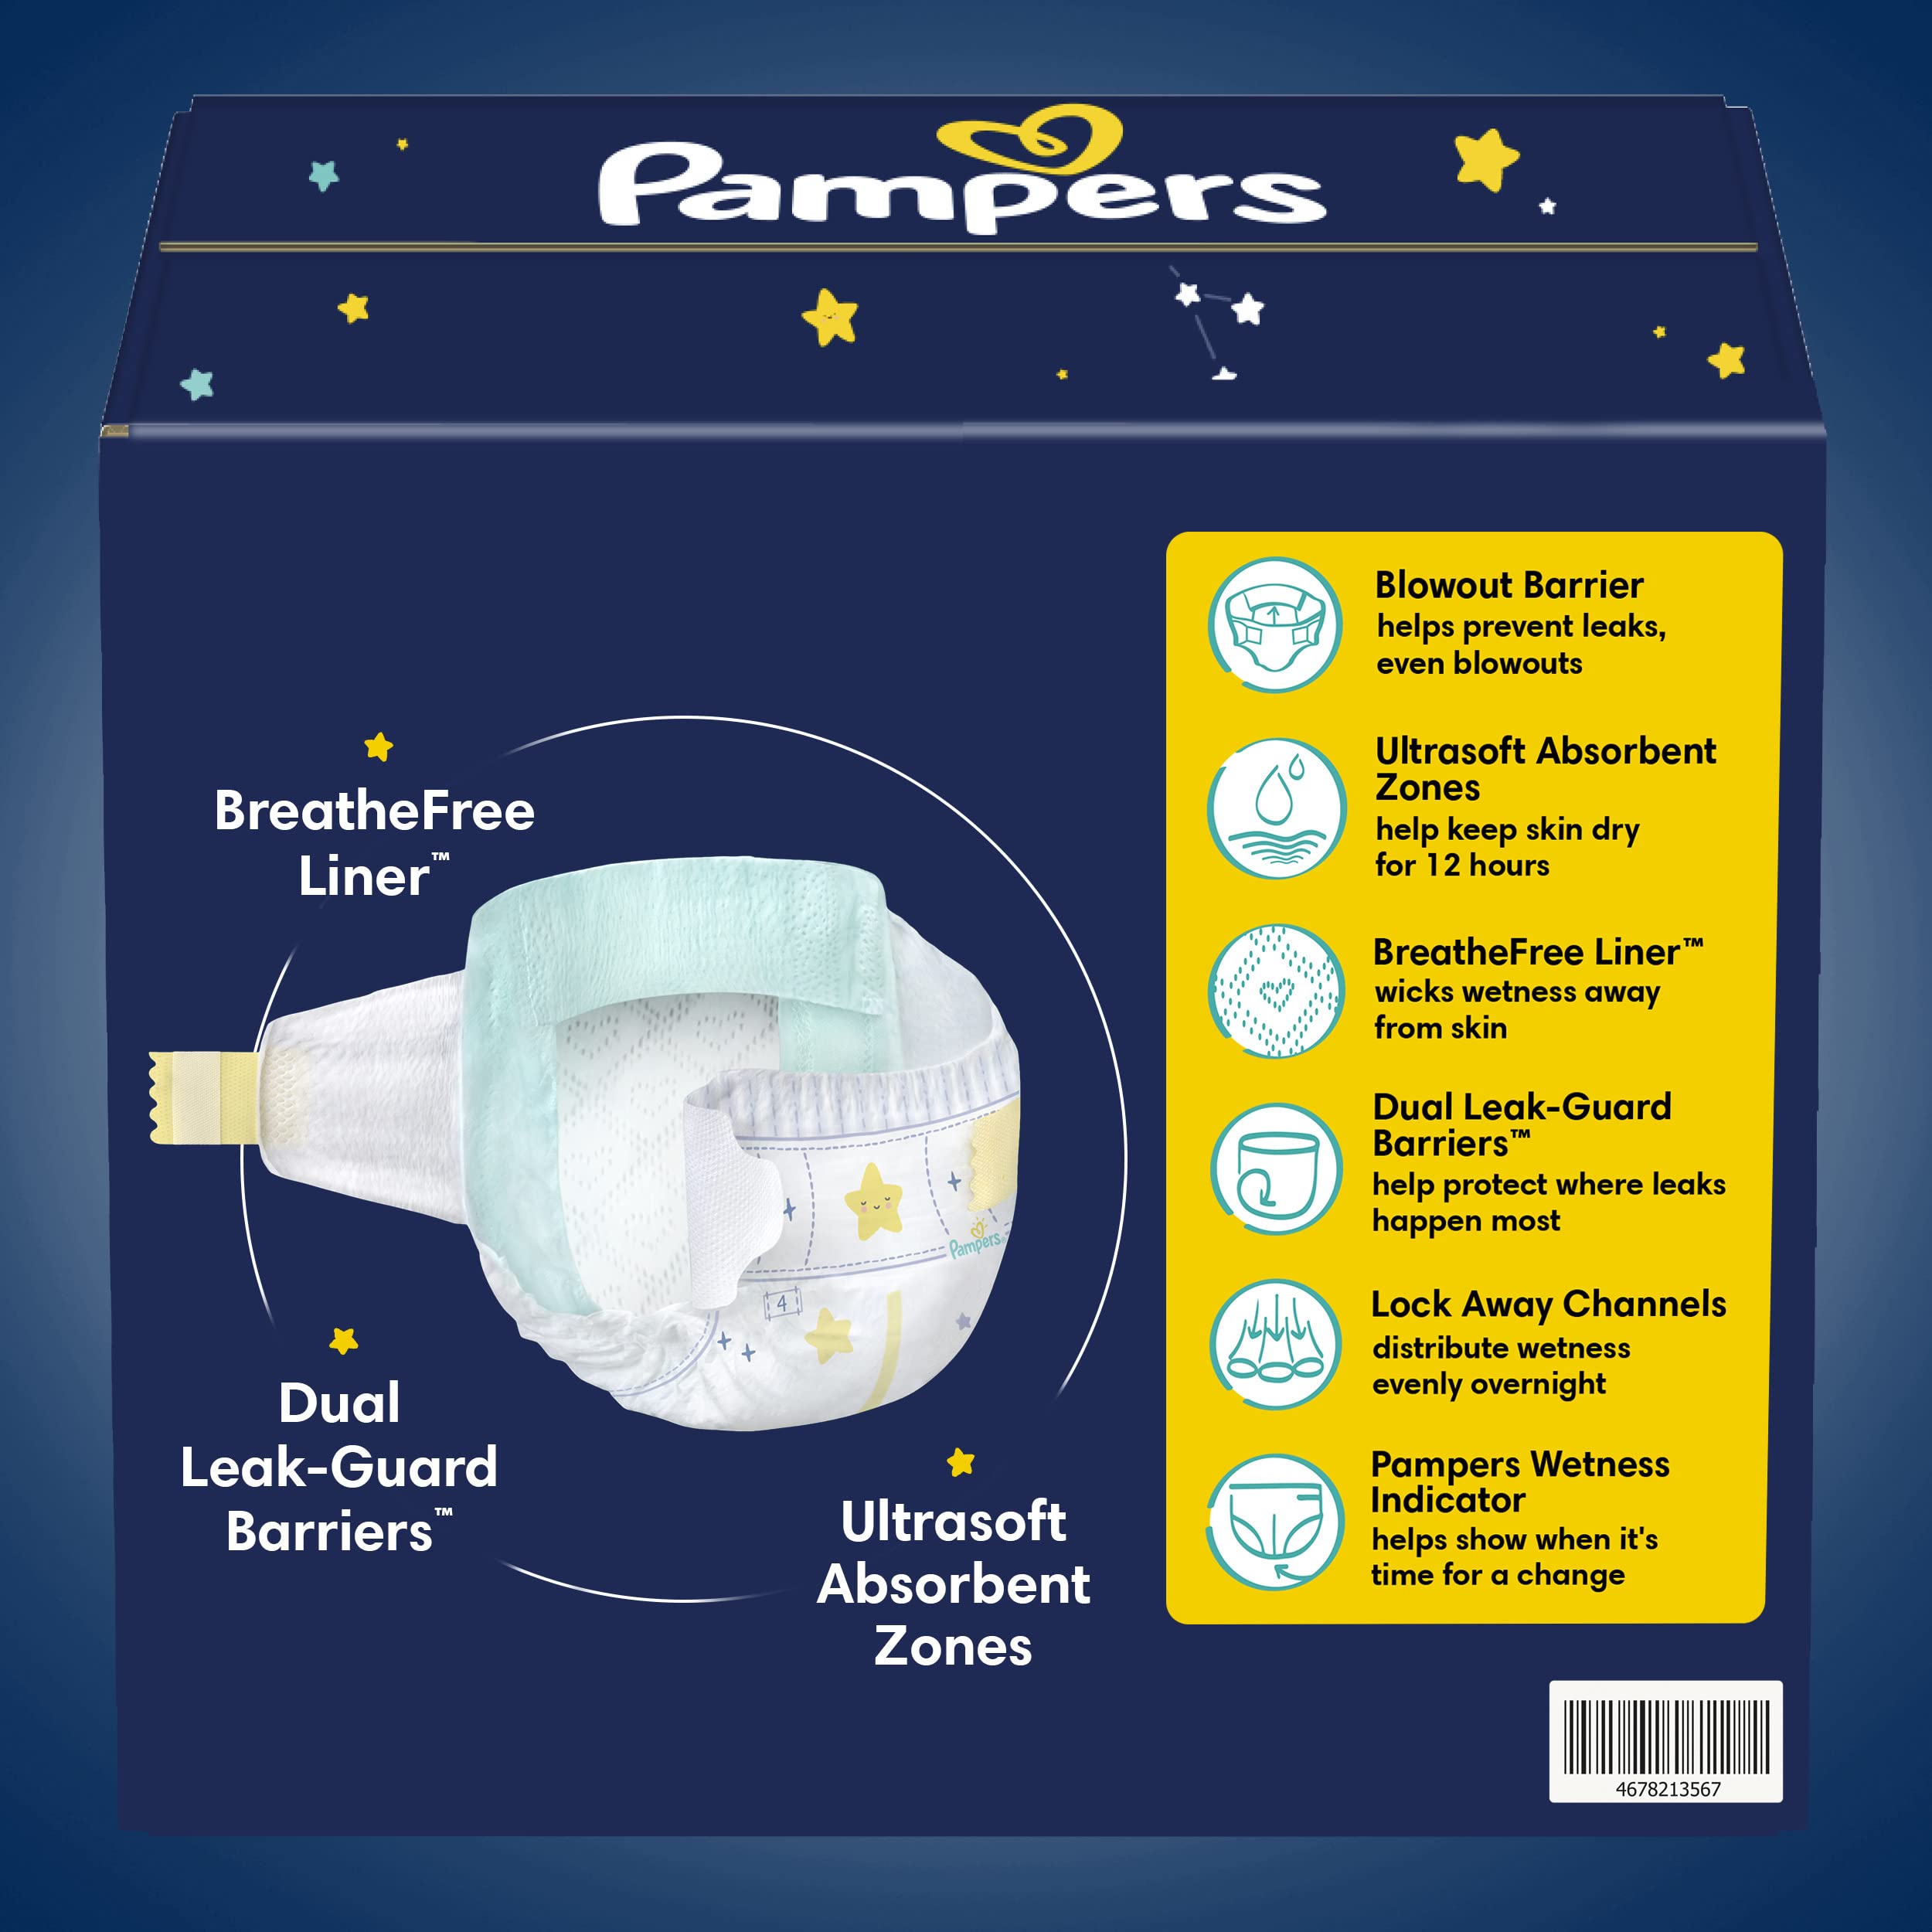 Diapers Size 5, 88 Count - Pampers Swaddlers Overnights Disposable Baby Diapers, Enormous Pack (Packaging & Prints May Vary)